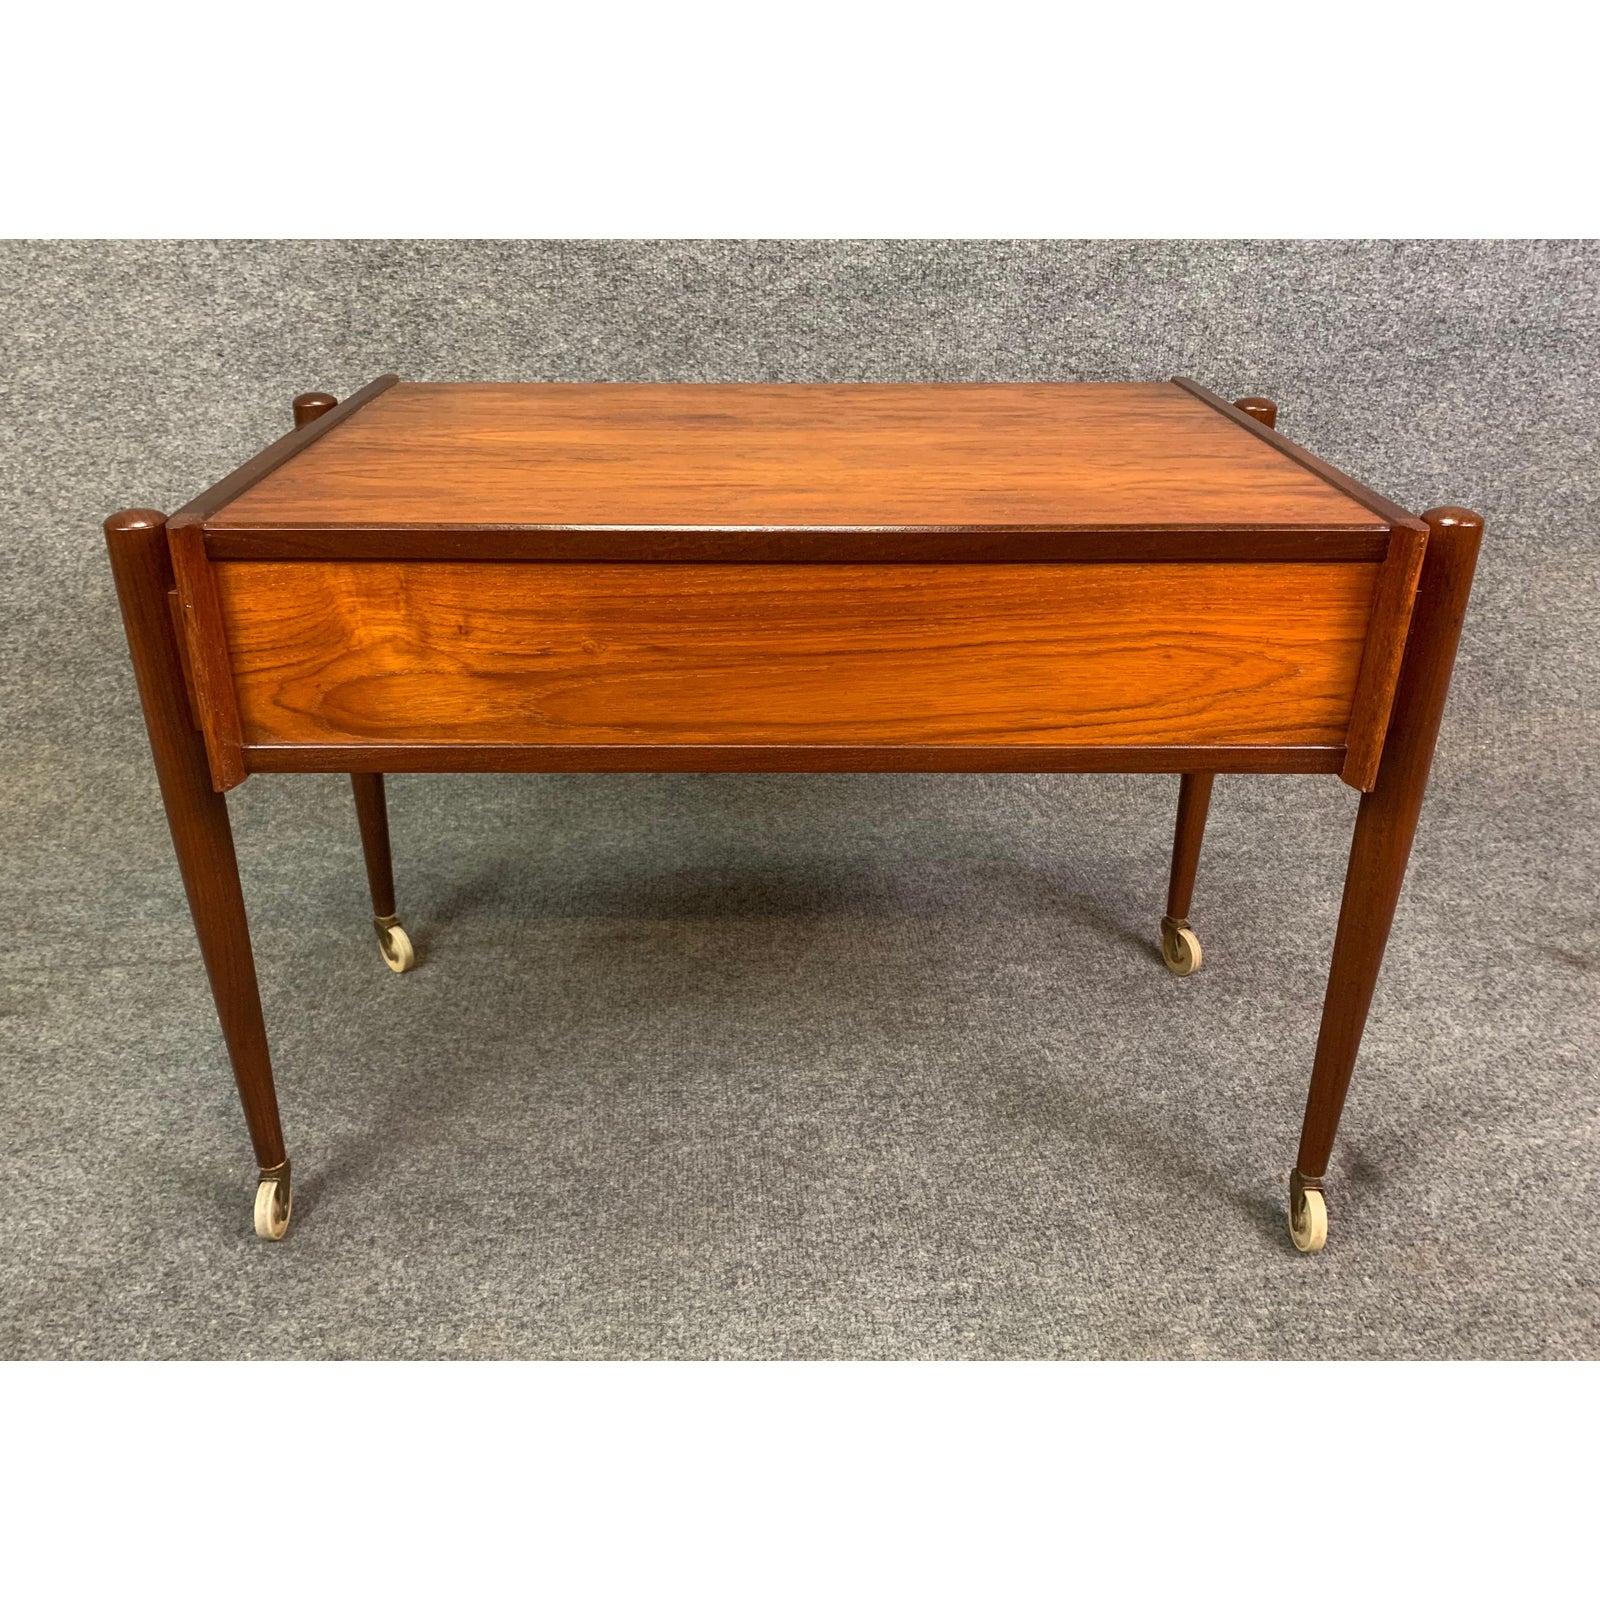 Here is a beautiful Scandinavian Modern teak nightstand - end table recently imported from Copenhagen to California before its refinishing. This exquisite piece features a vibrant wood grain, four solid afromasia wood tapered legs with casters